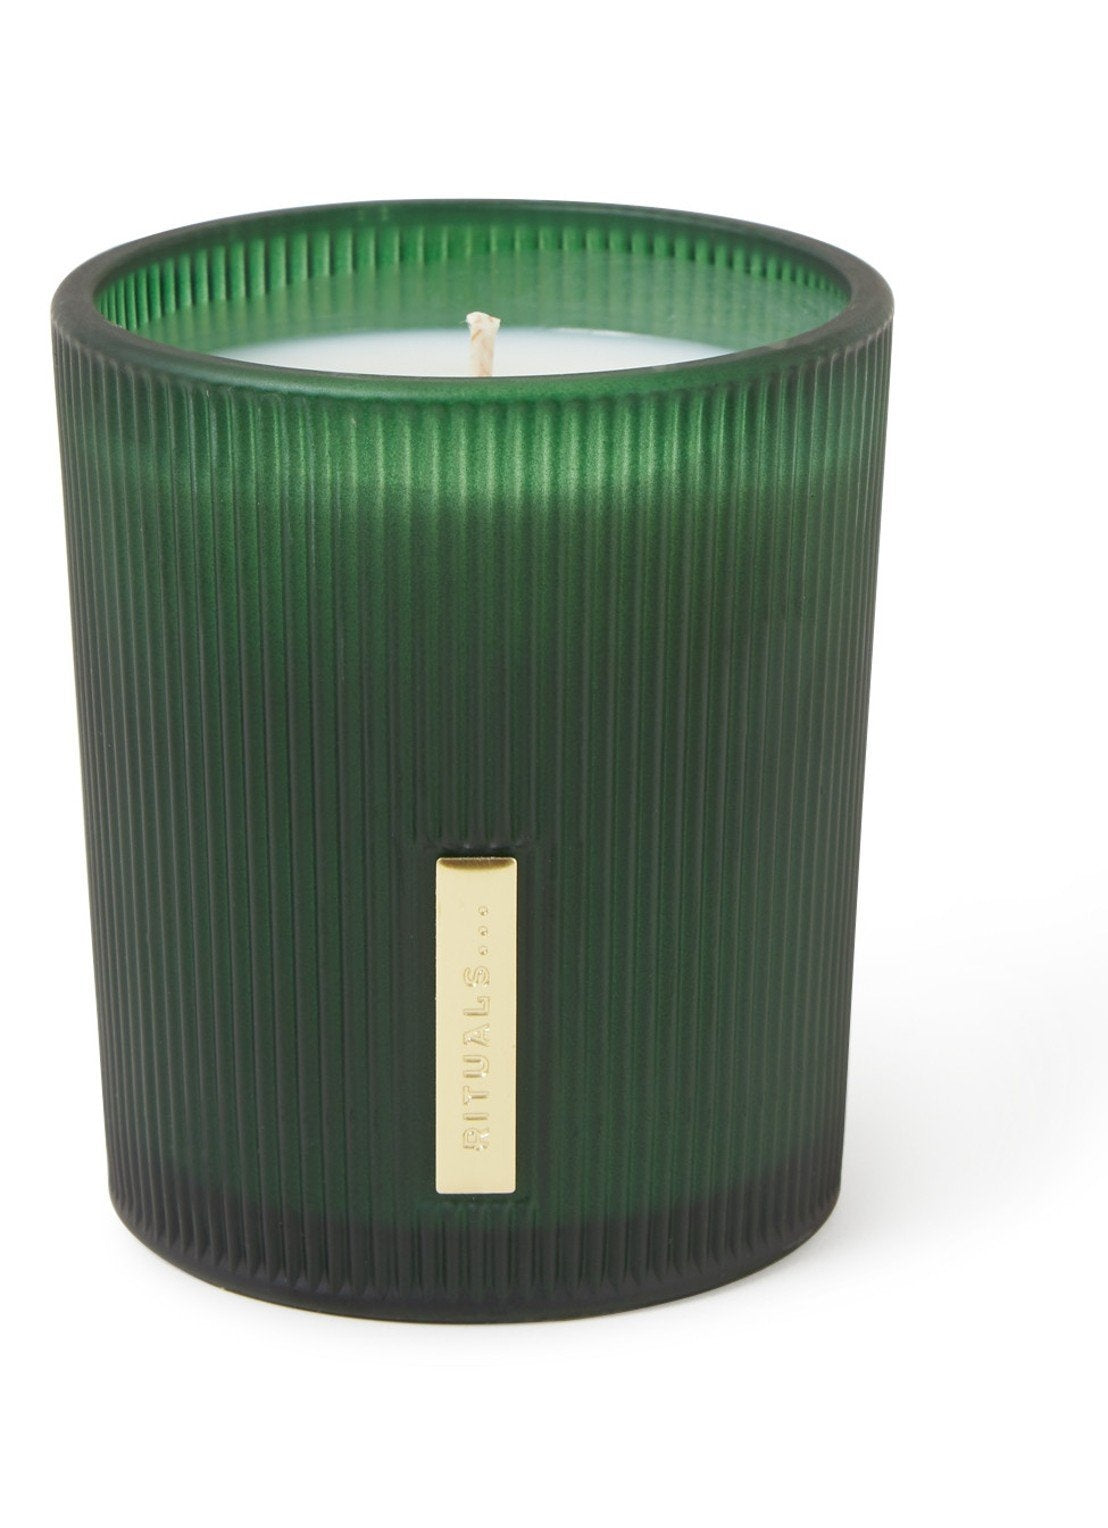 The Ritual of Jing Scented Candle